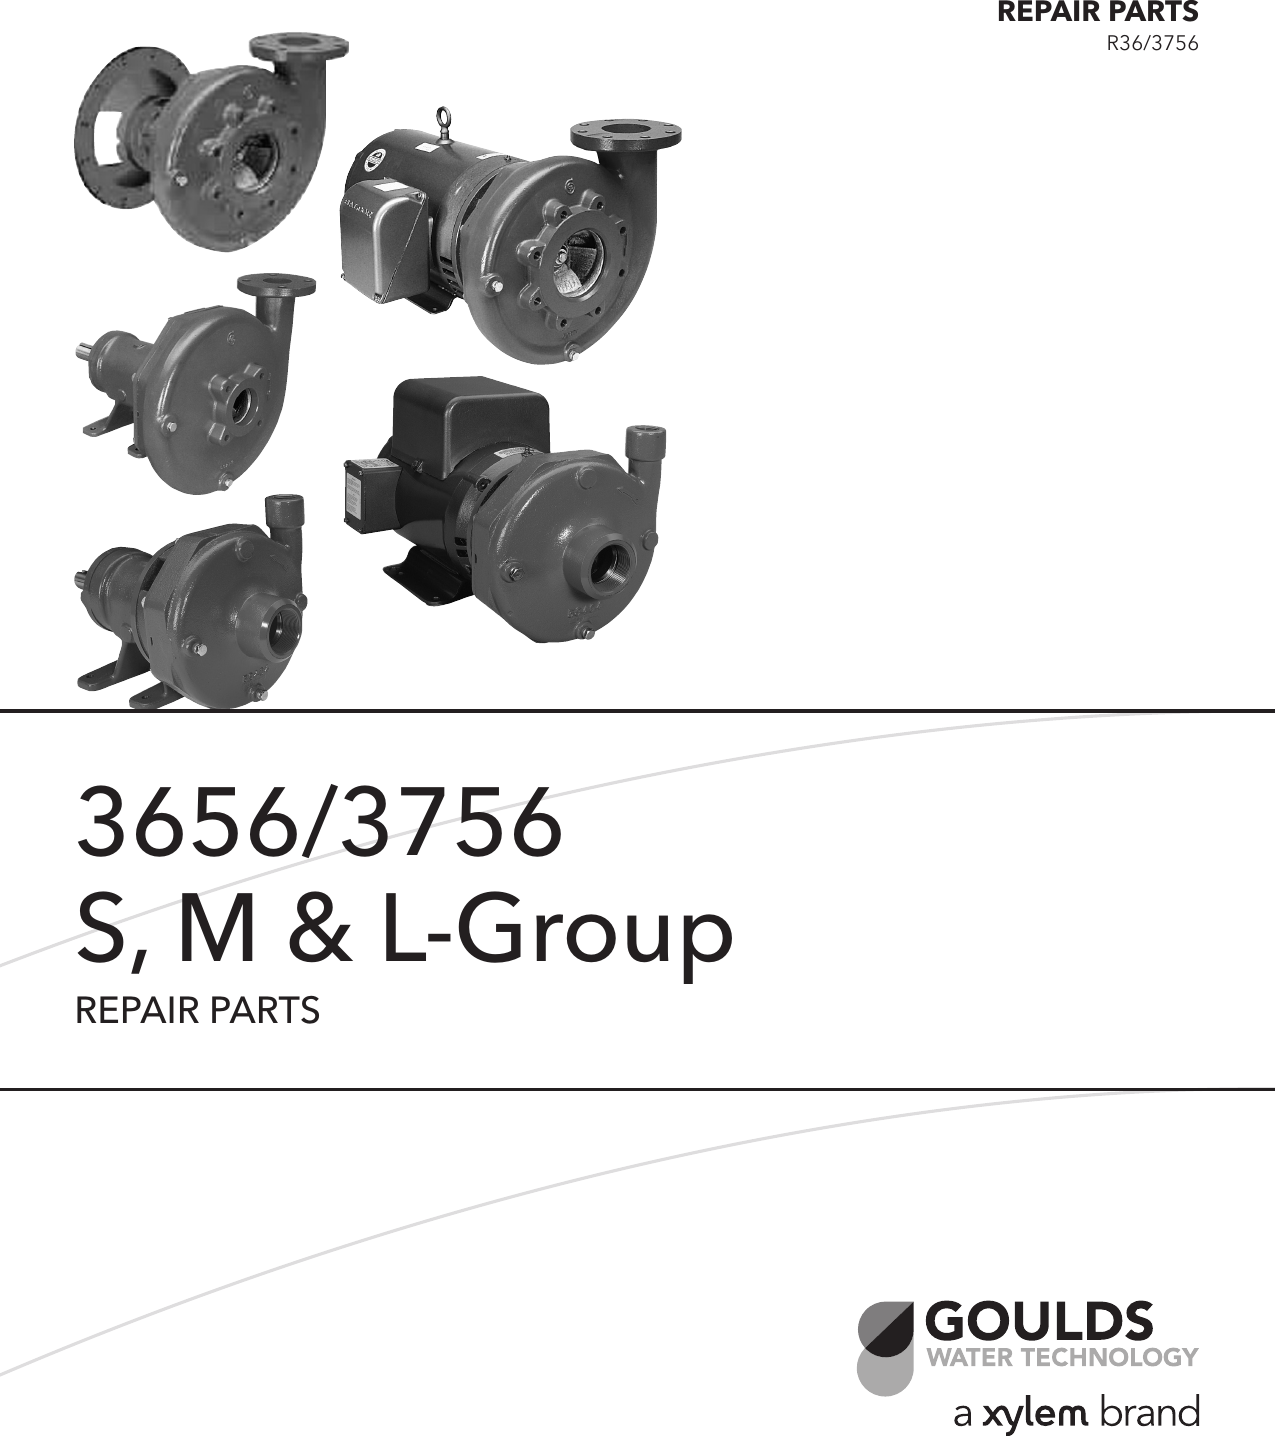 539883 7 Goulds 3656 M Series iCentrifugali iPump Si L Group 